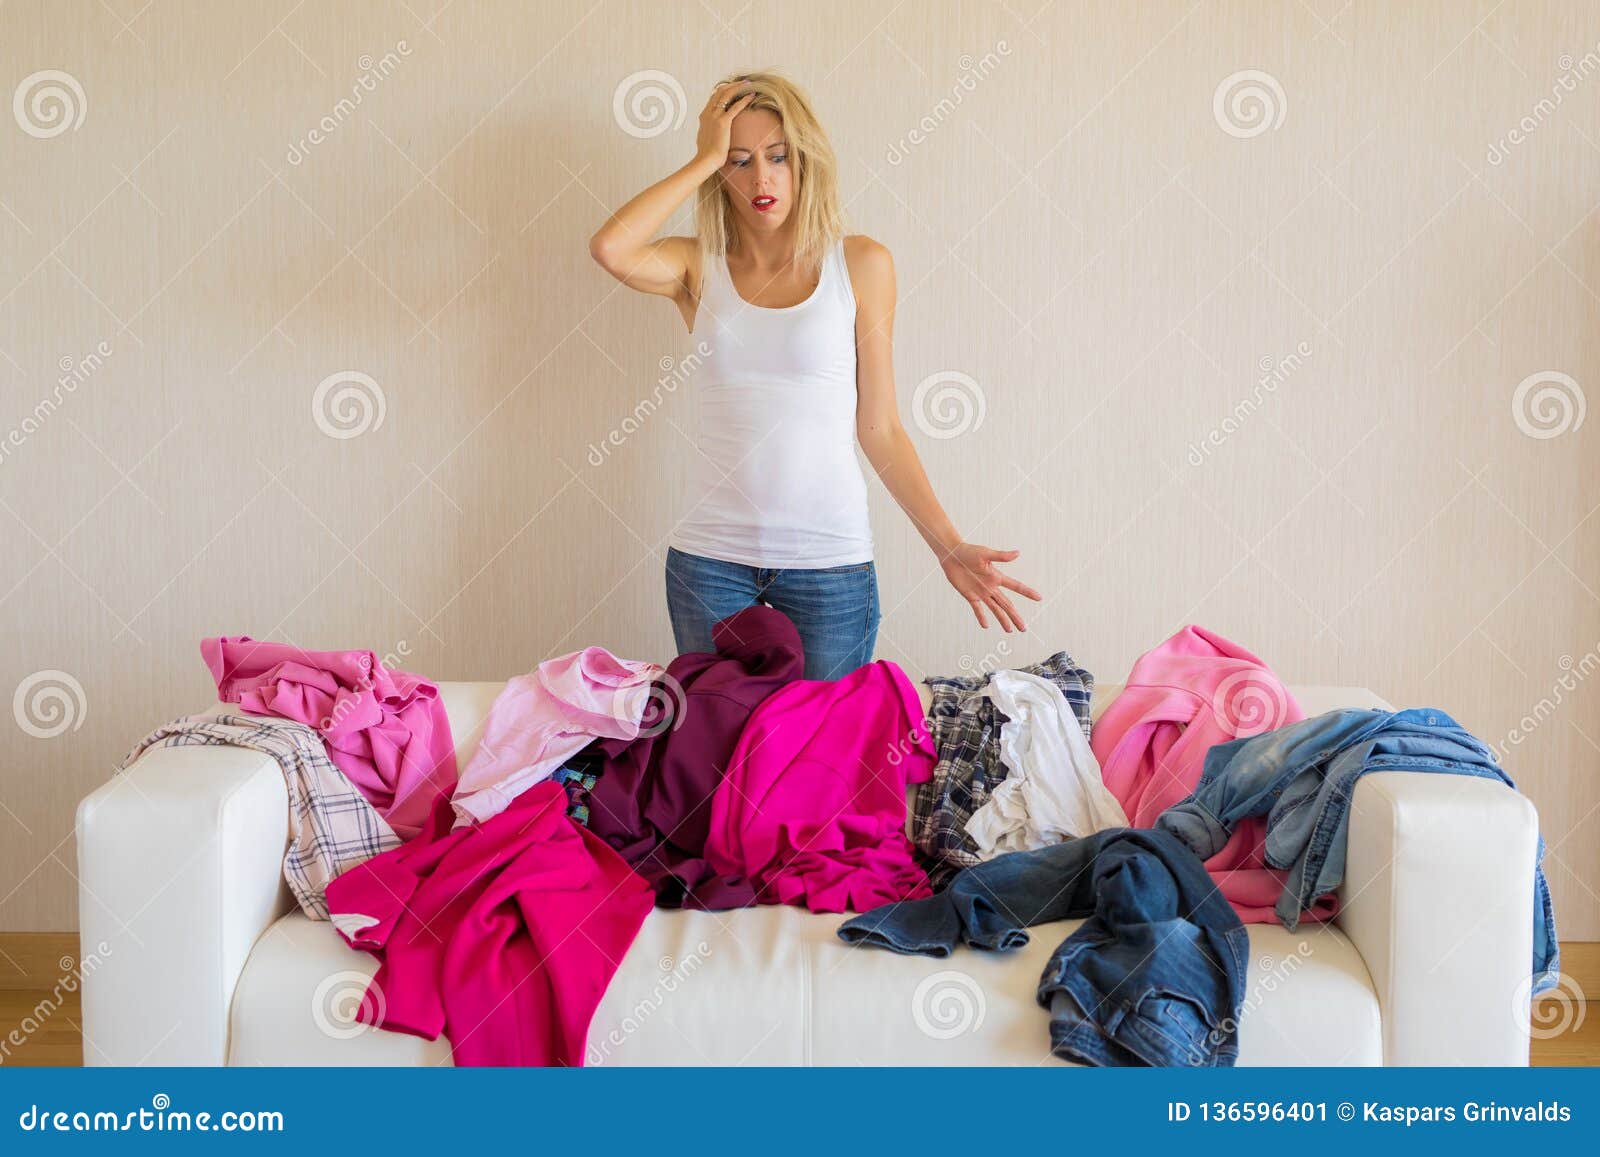 woman looking at messy stack of clothes at home